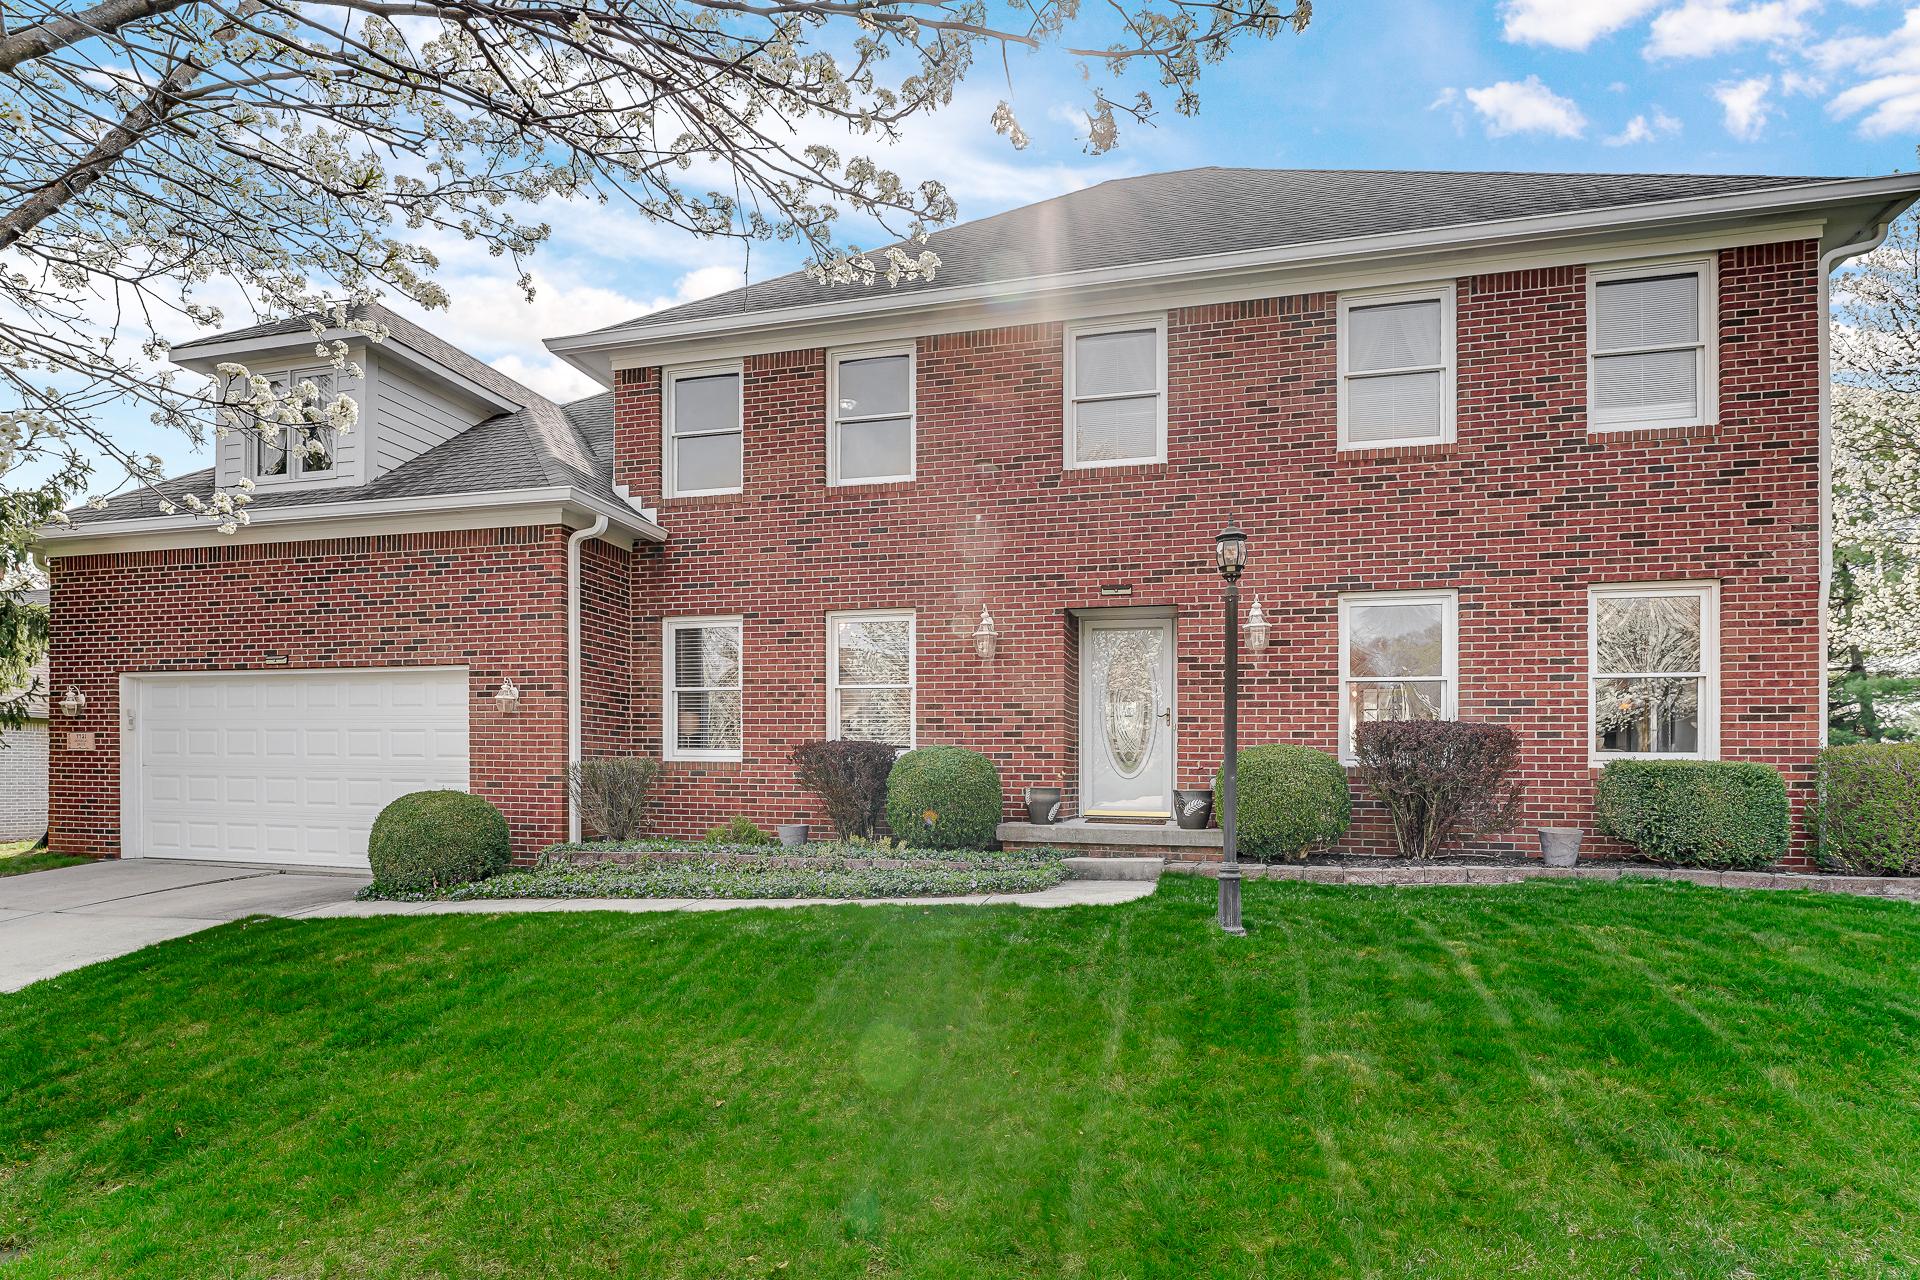 Photo one of 7721 Donegal Dr Indianapolis IN 46217 | MLS 21971358